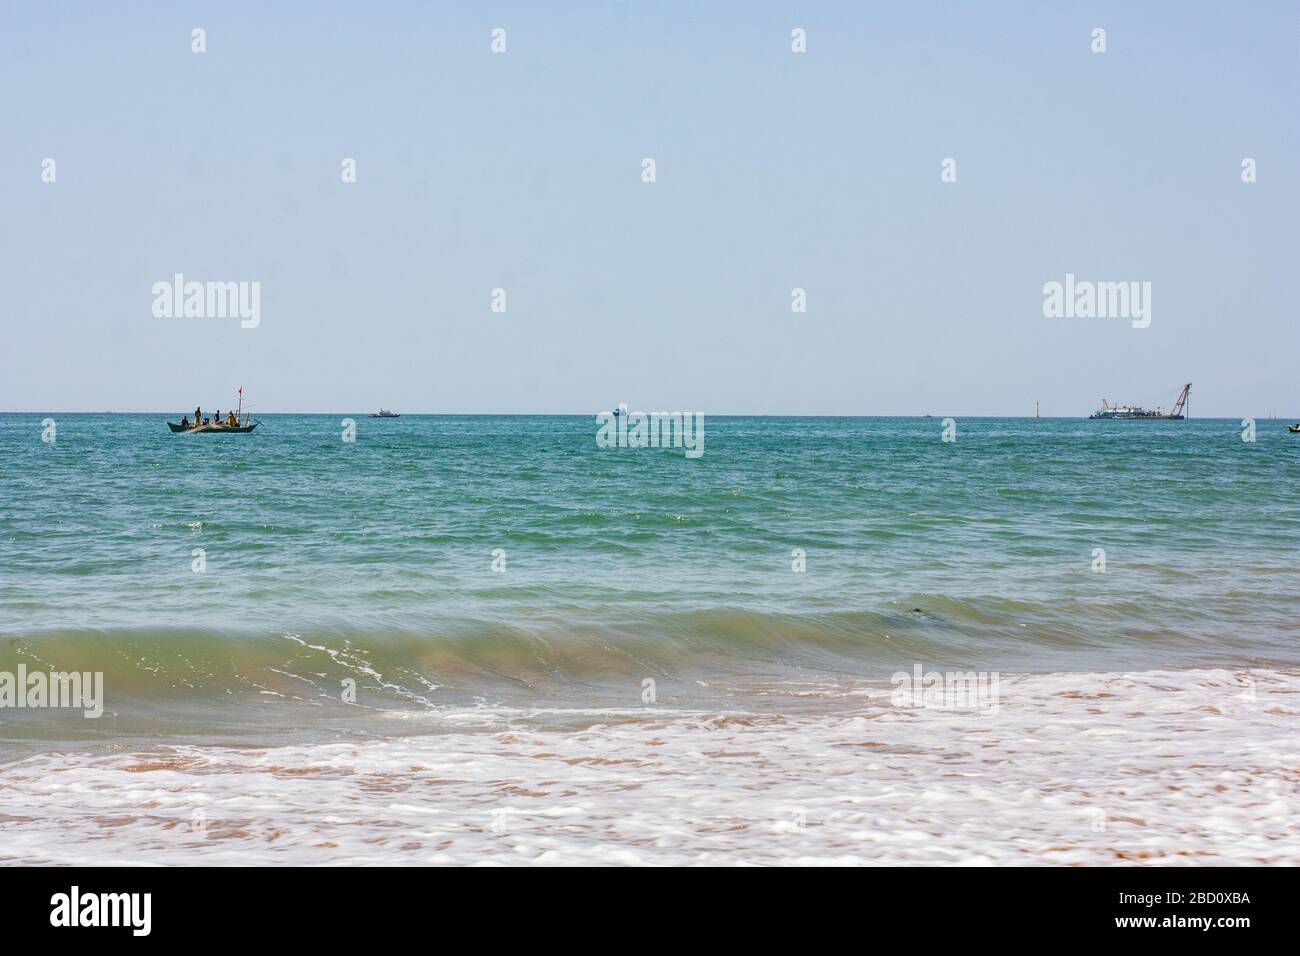 Tushan Beach, Hawks Bay, Karachi, Pakistan On 24-02-2019 While Some Local Boats Are Fishing At Afternoon Stock Photo